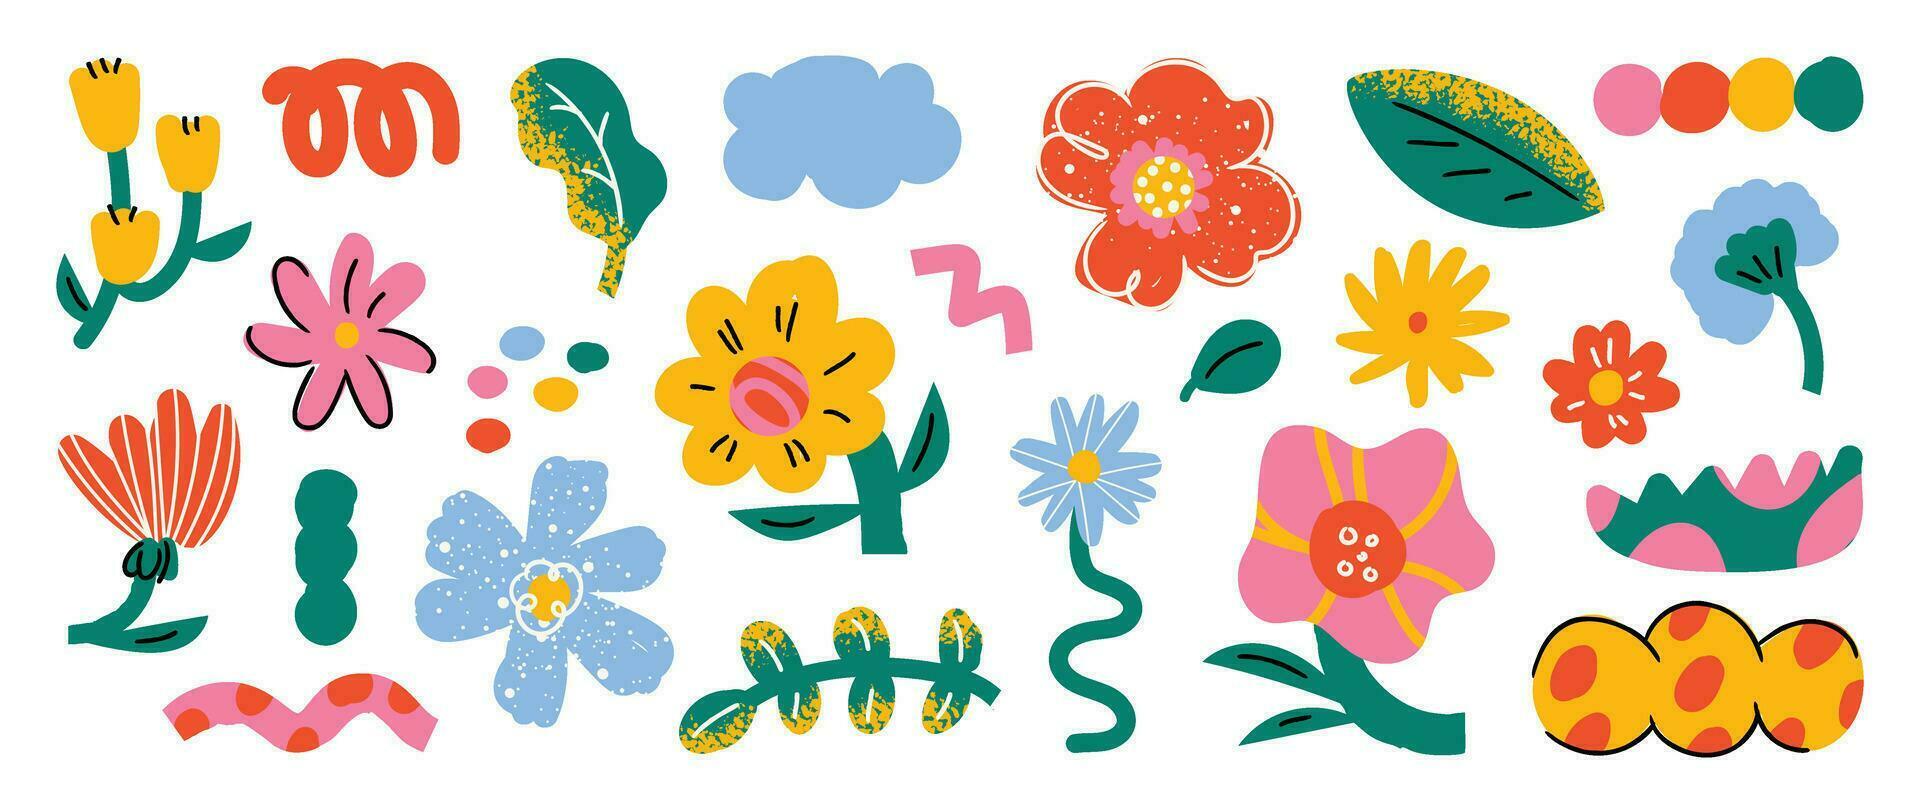 Set of abstract retro organic shapes vector. Collection of contemporary figure, flower, cloud, foliage in funky groovy style. Cute hippie design element perfect for banner, print, stickers. vector